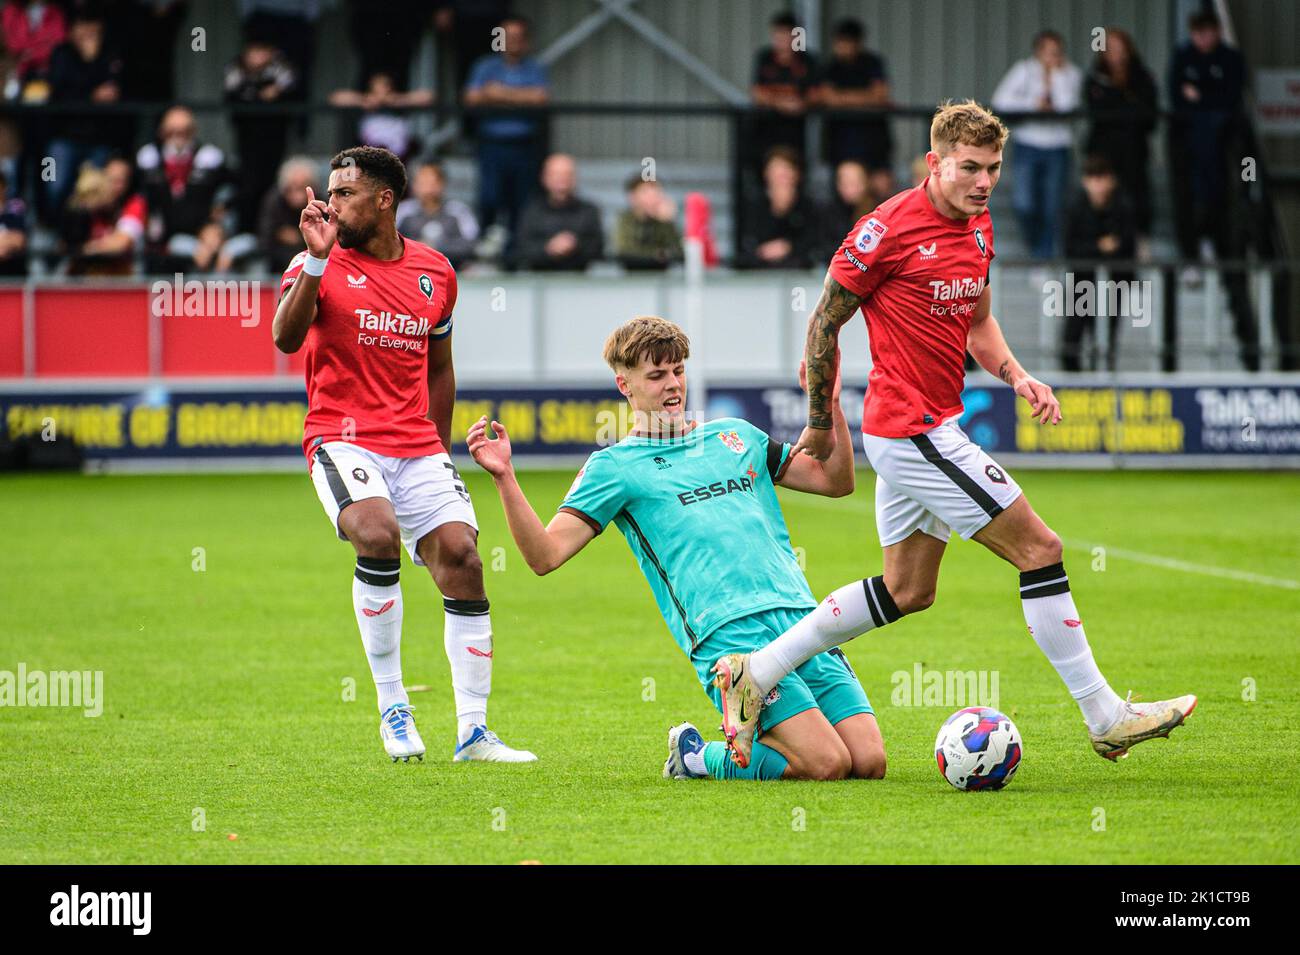 Ibou Touray of Salford City tackles Rhys Hughes of Tranmere Rovers during the Sky Bet League 2 match between Salford City and Tranmere Rovers at Moor Lane, Salford on Saturday 17th September 2022. Stock Photo